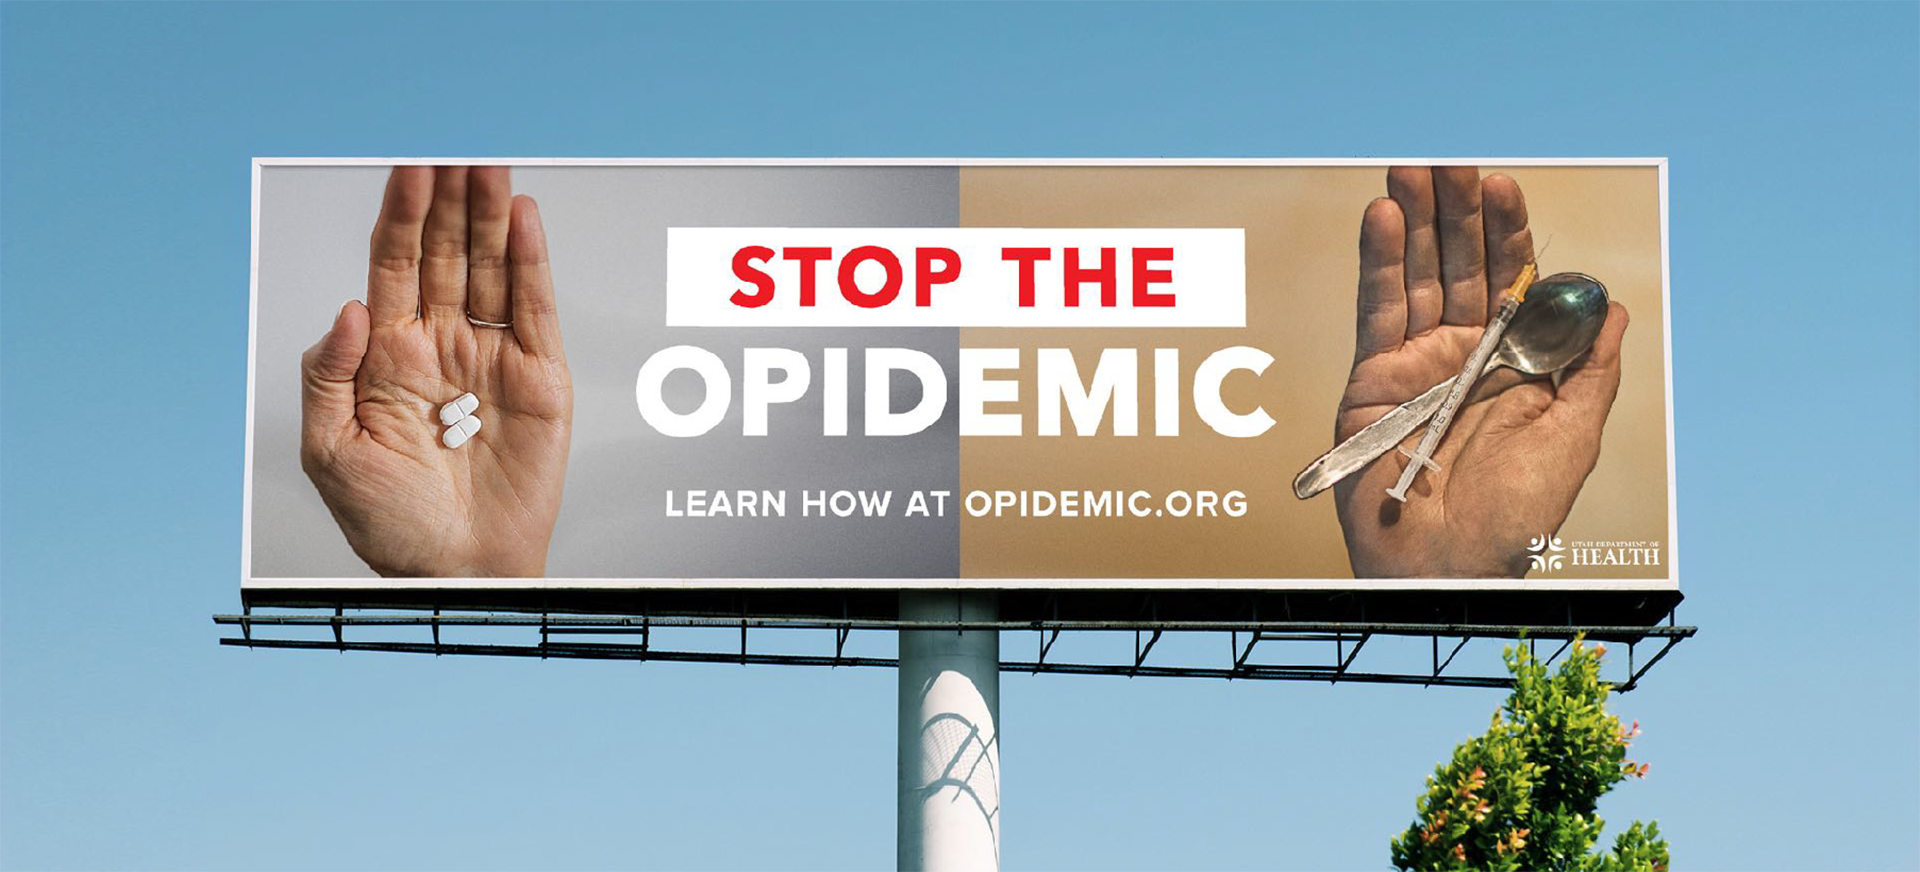 Stop the opidemic billboard